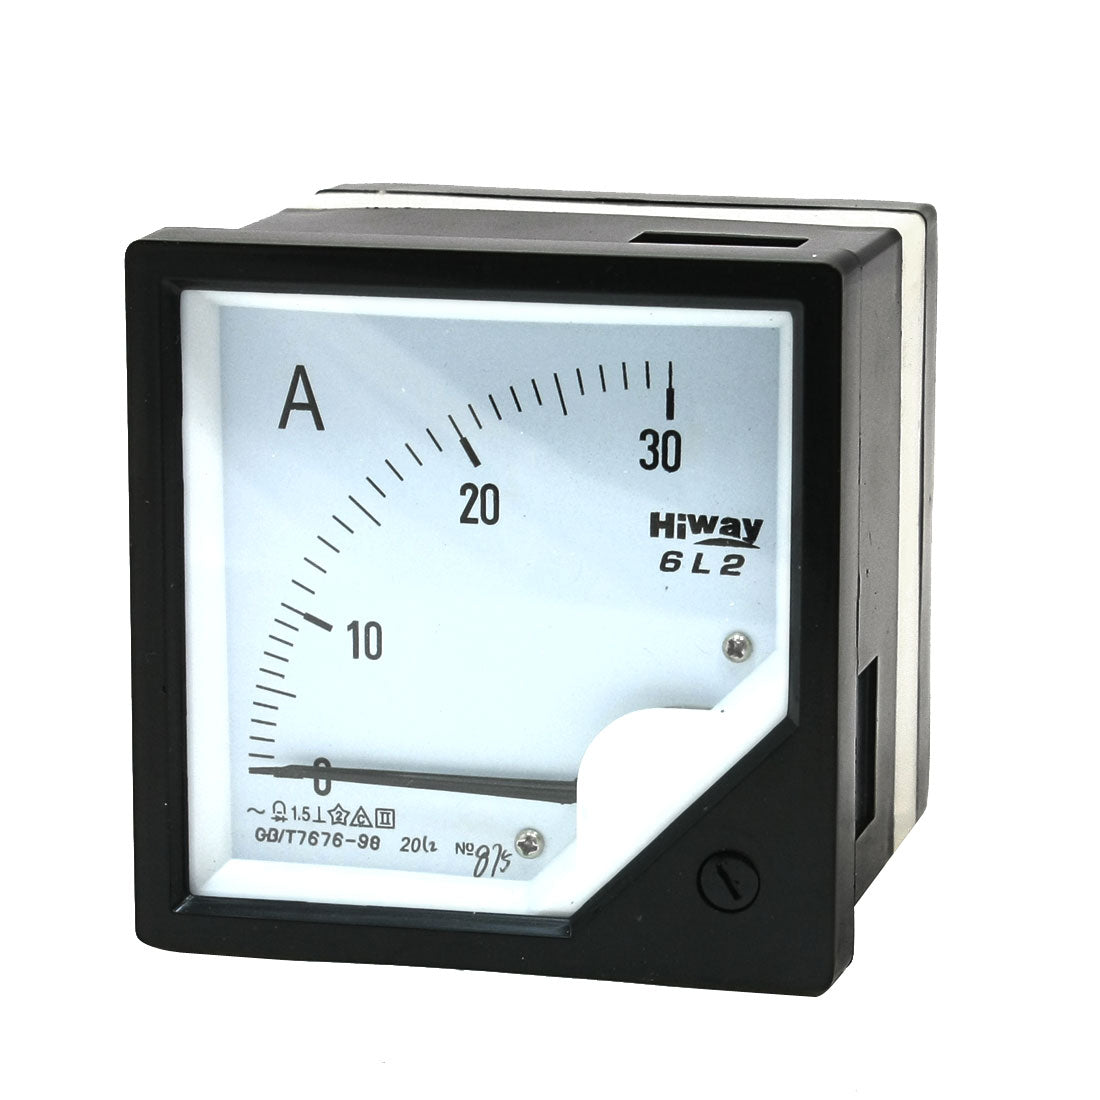 uxcell Uxcell 6L2 Model 80mm x 80mm Square Panel AC 0-30A Analog Meter Ammeter